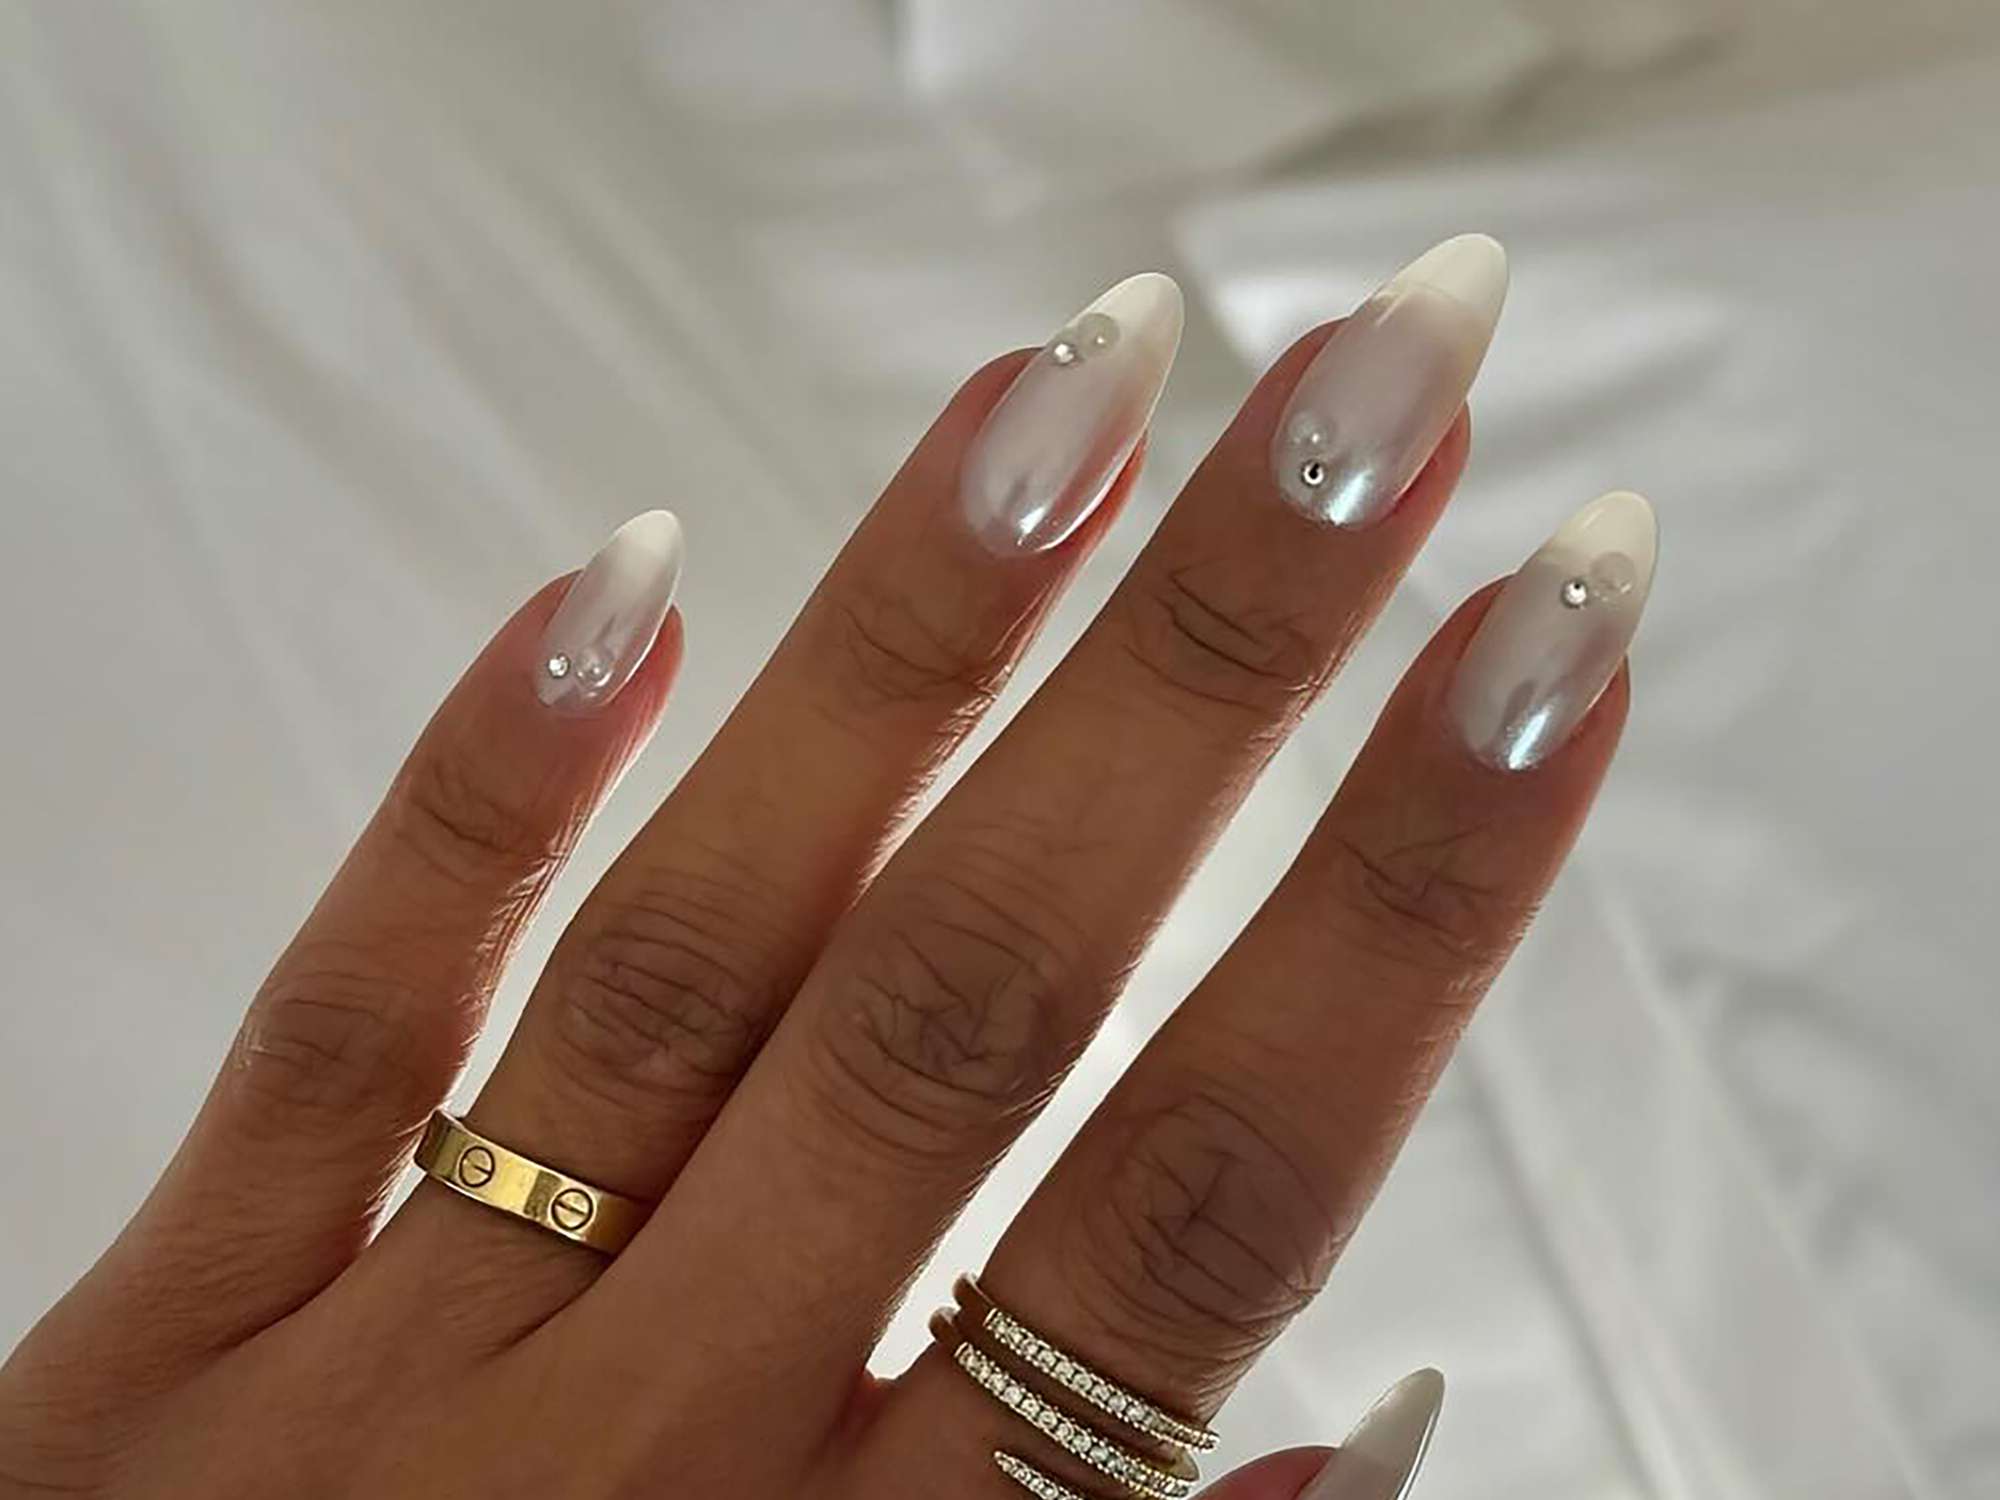 15 White Chrome Nail Ideas That'll Take You From the Beach to the Office